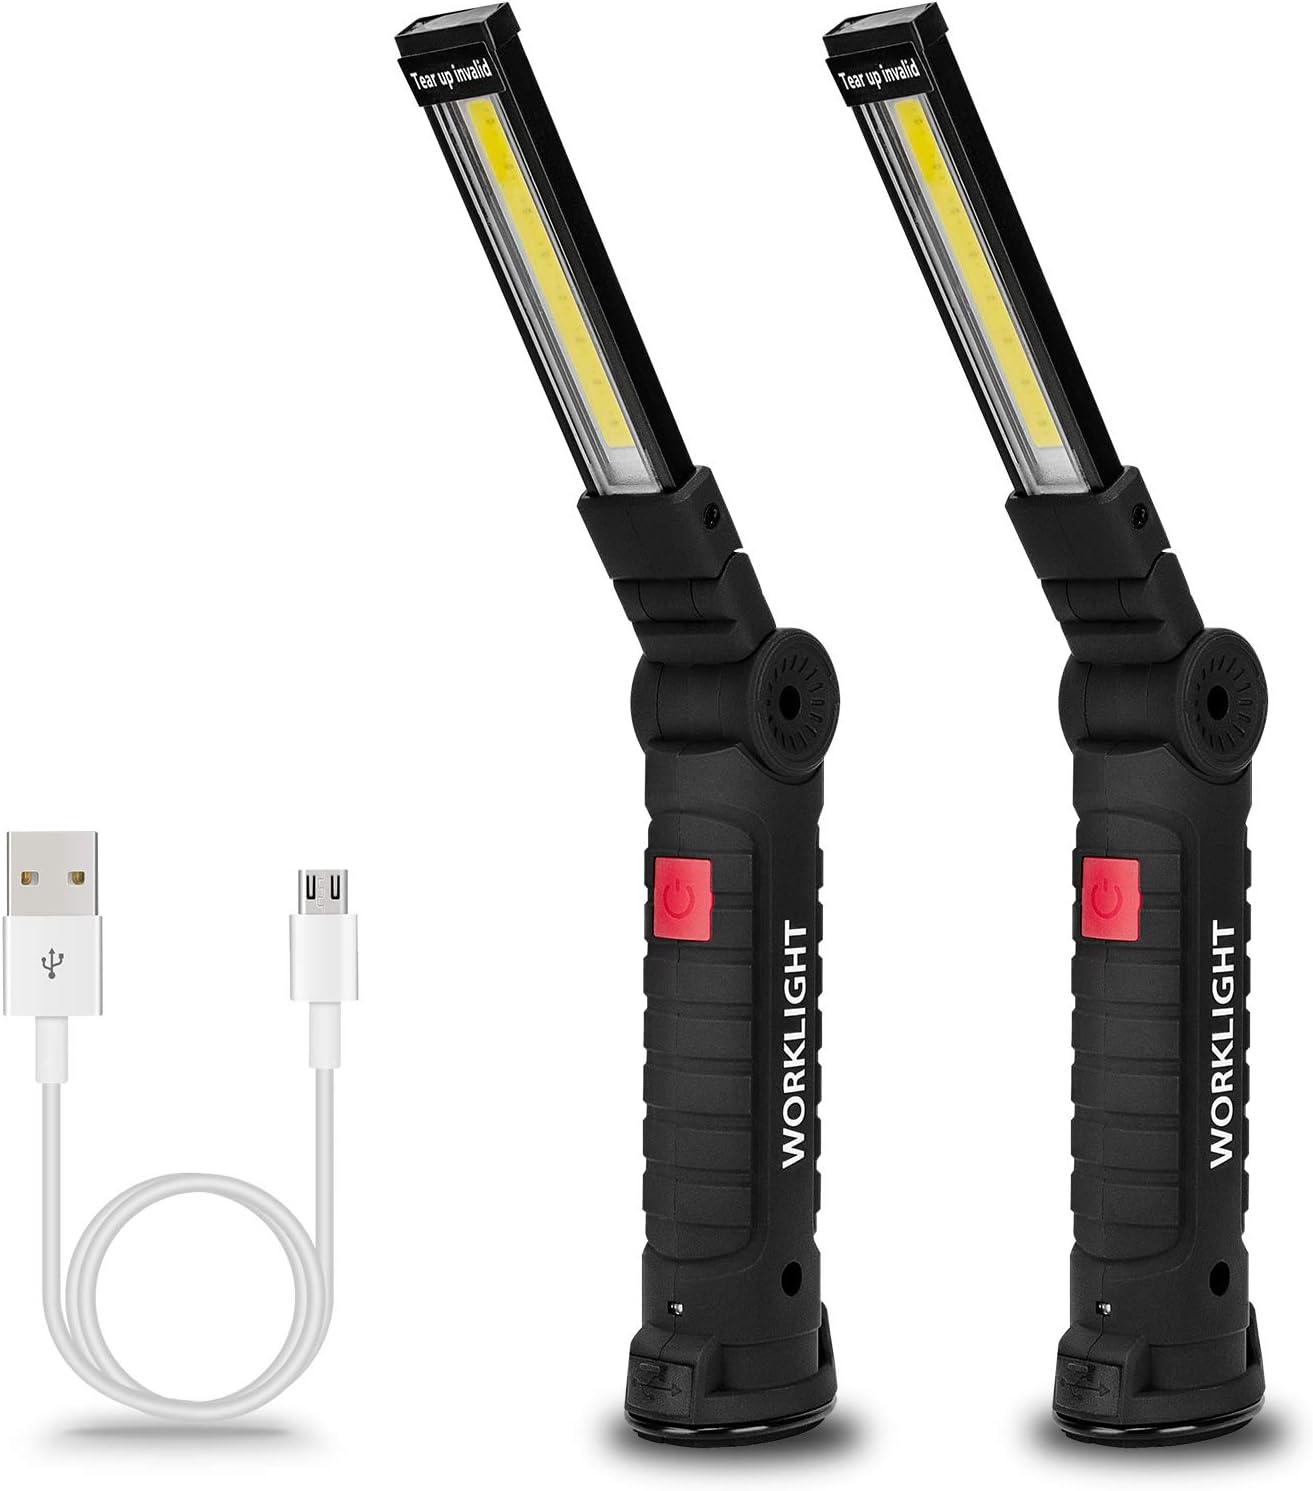 Lmaytech Gifts for Dad, 2 Pack Black Rechargeable LED [...]